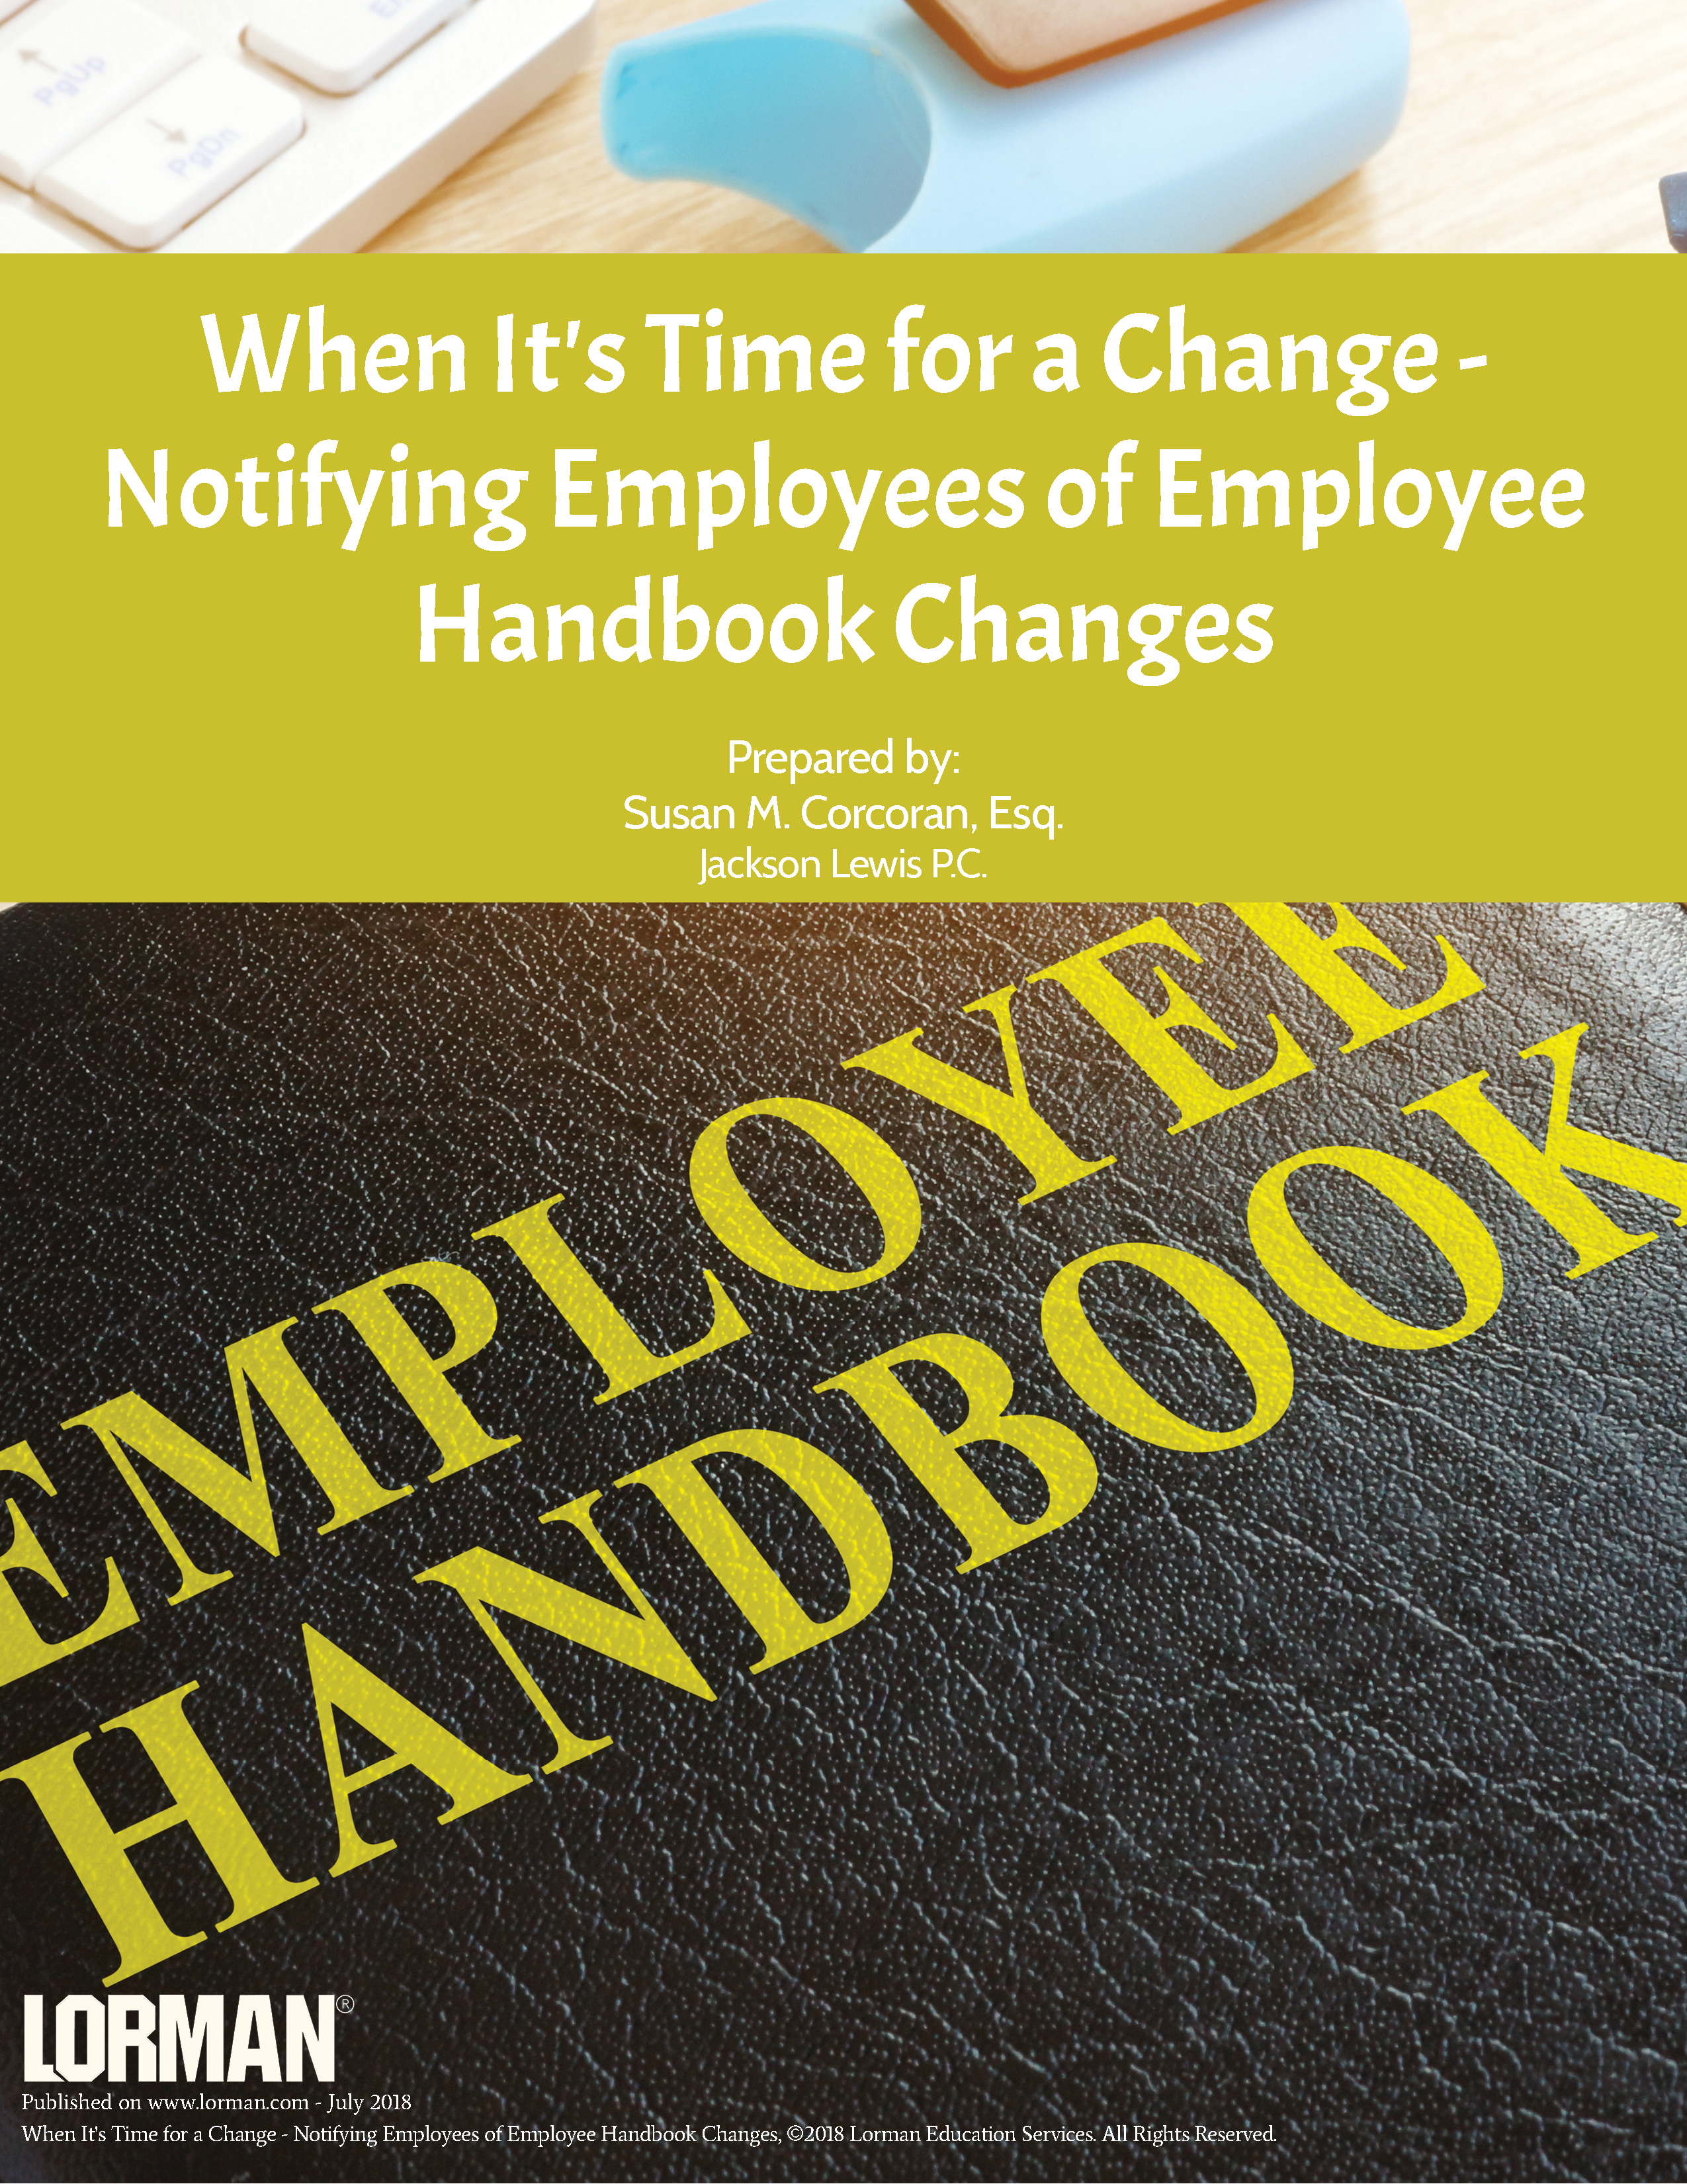 When It's Time for a Change - Notifying Employees of Employee Handbook Changes